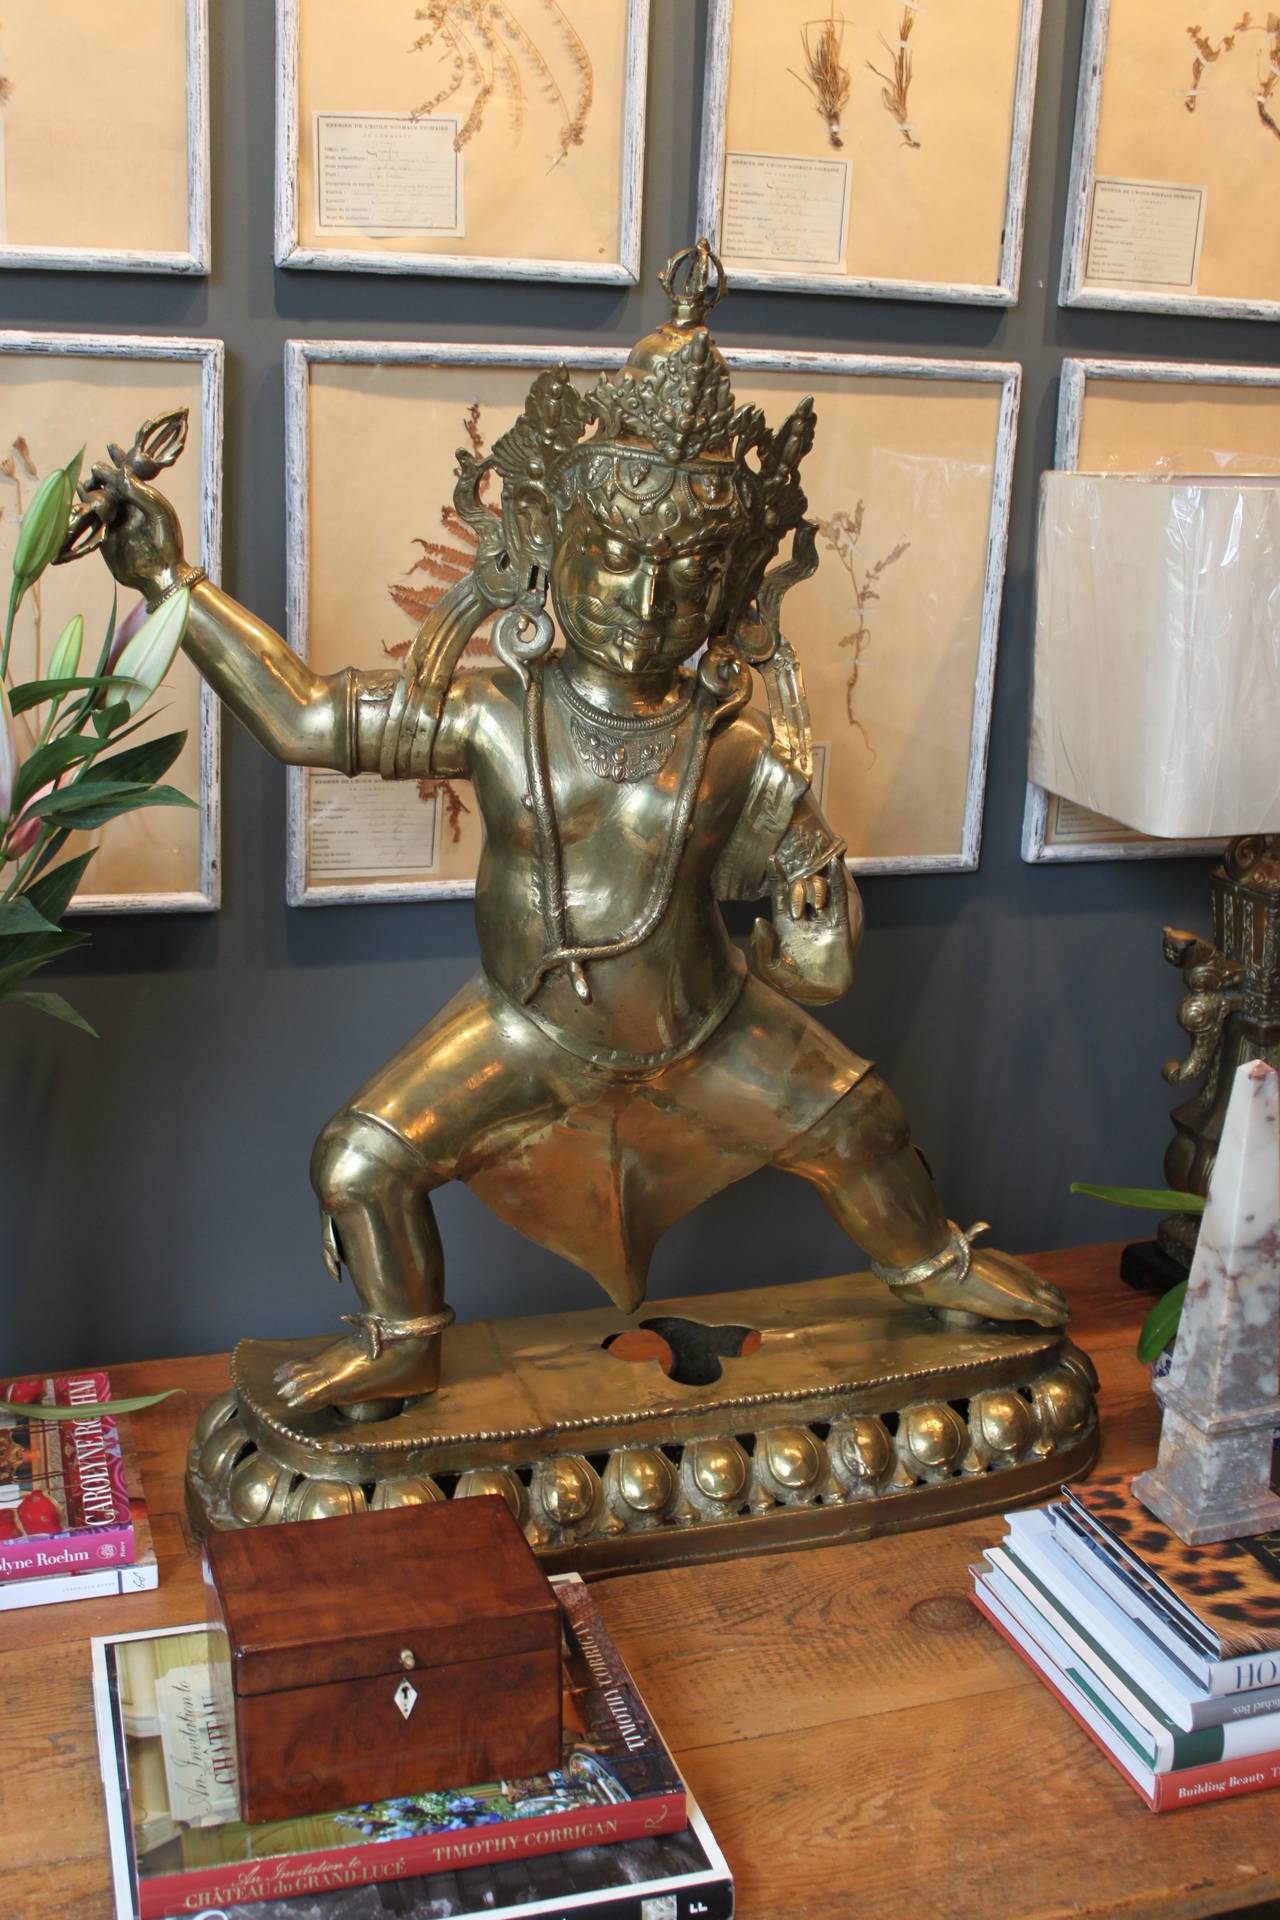 Massive brass statue of Vajrapani. This statue is in two parts with the body completely lifting out of the brass base. The statue is exceptionally heavy with very detailed brass figuring.

Vajrapani is the protector and guide of the Buddha, and